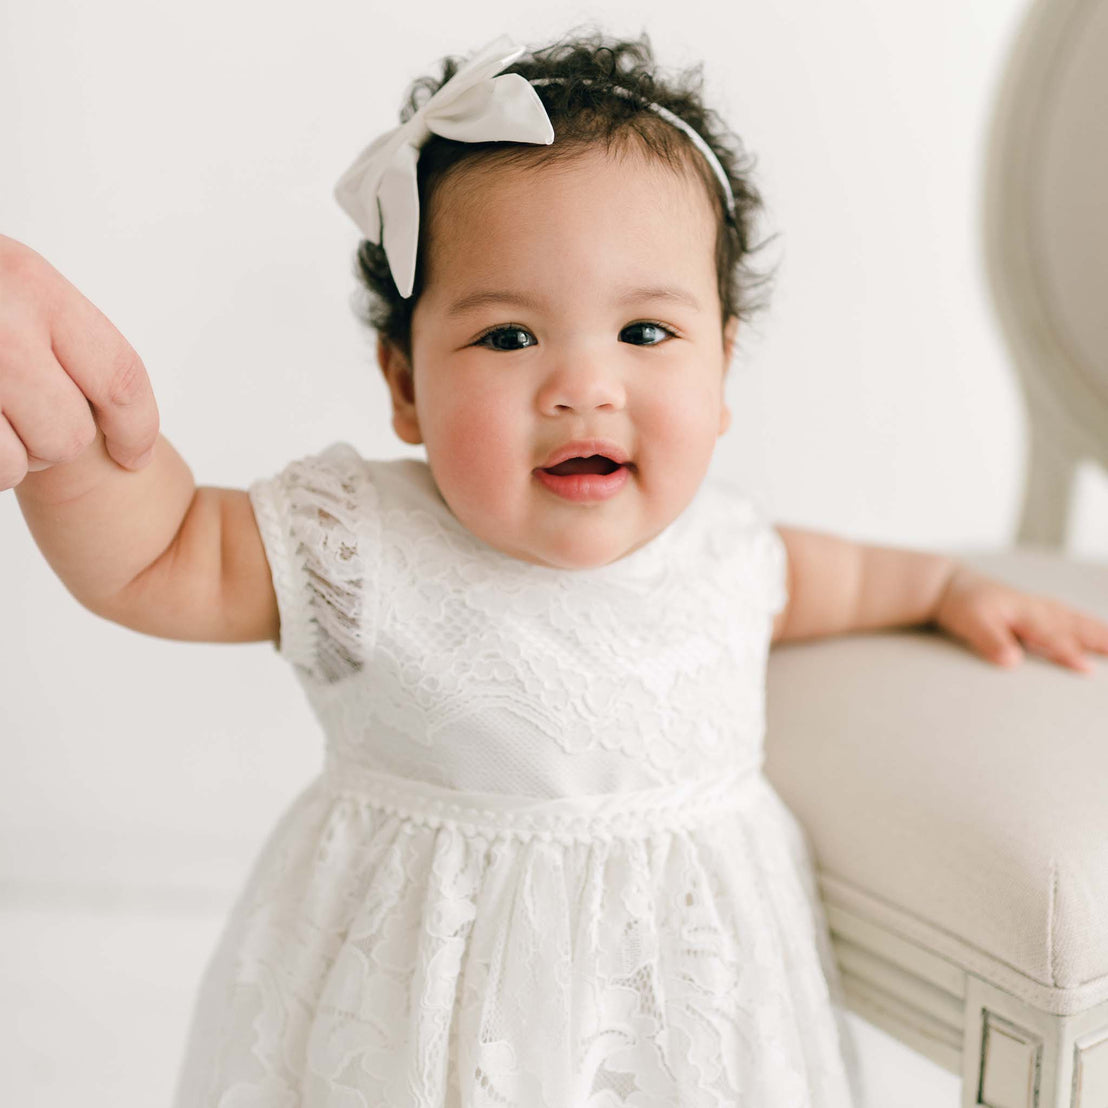 A cheerful baby girl with curly hair wearing a Victoria Puff Sleeve Christening Dress and a white bow headband smiles while reaching out her hand, standing next to a light-colored chair in a brightly lit room.